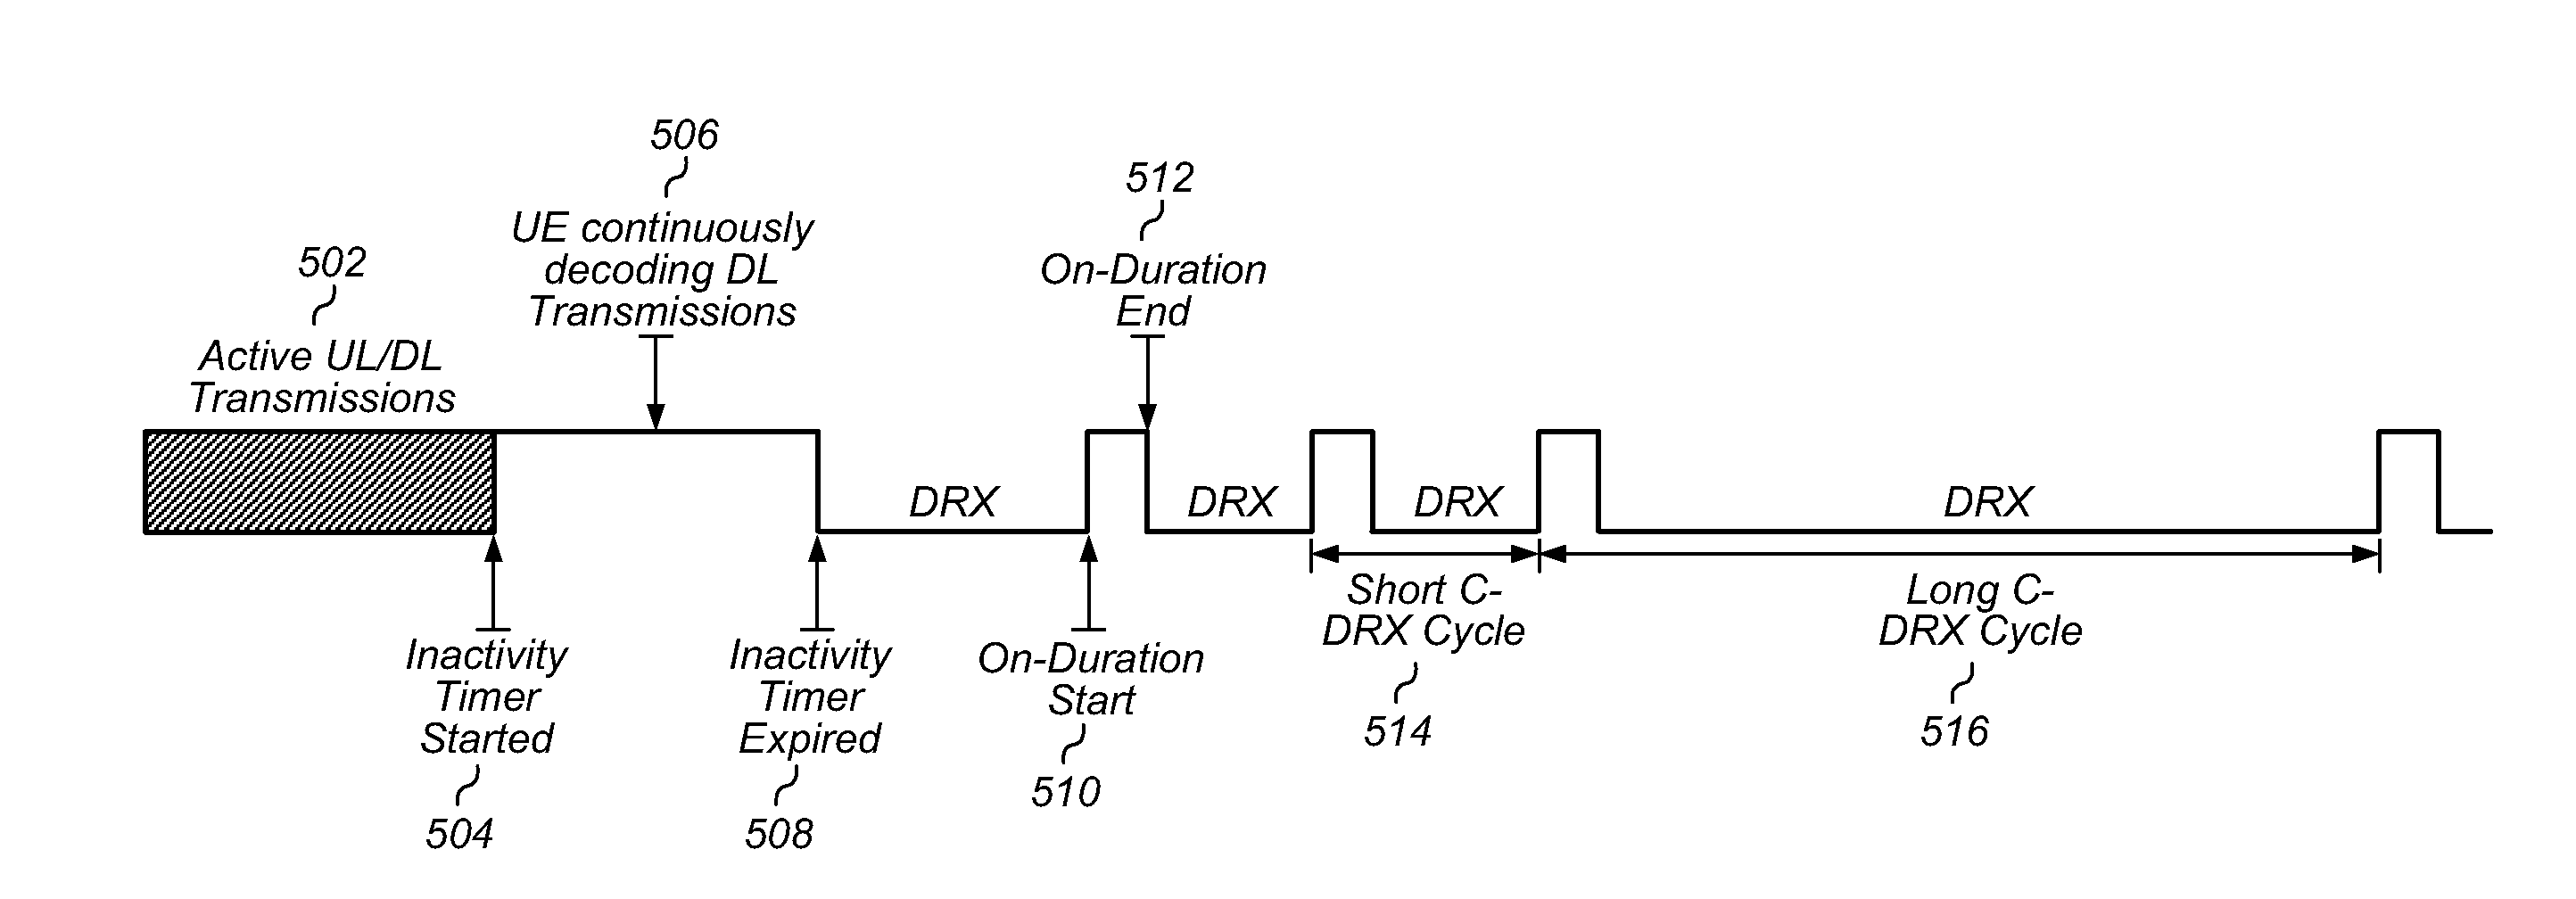 Synchronizing Uplink and Downlink Transmissions in a Wireless Device